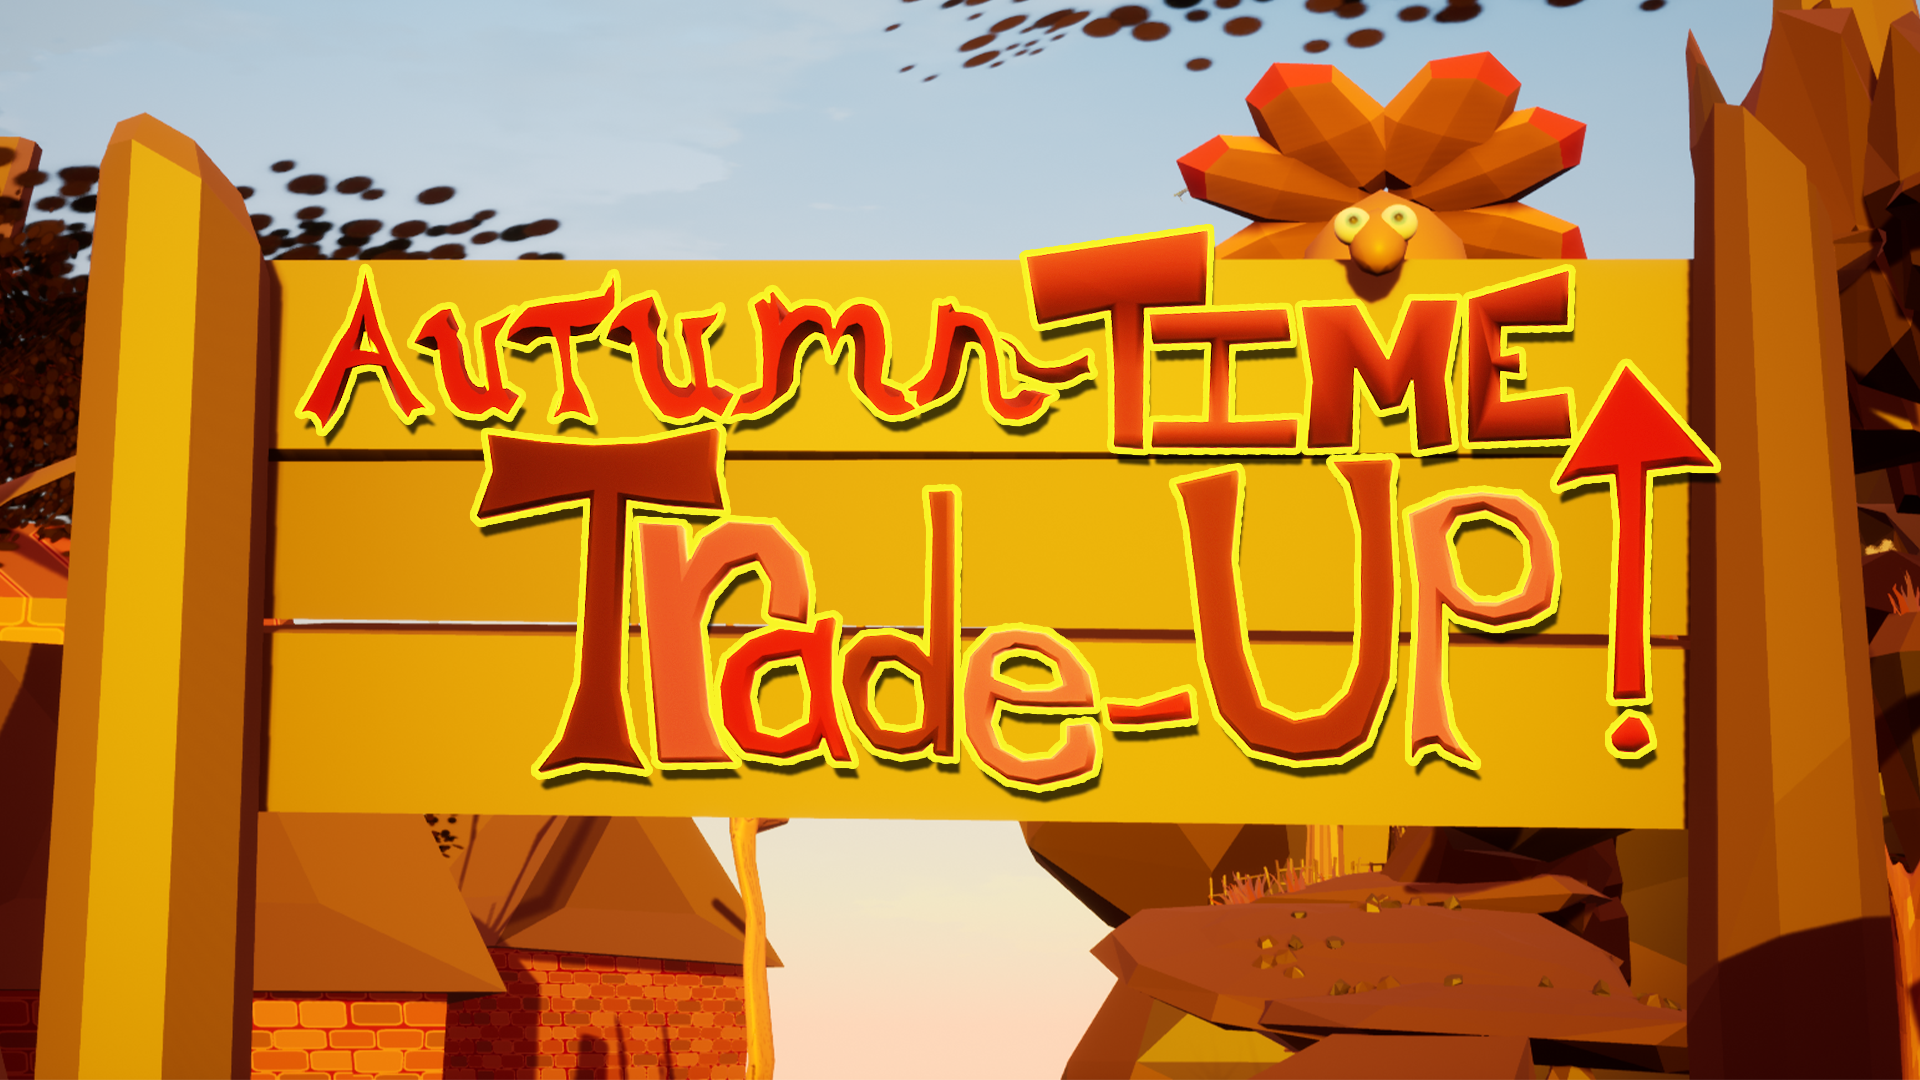 Autumn-Time Trade-Up!